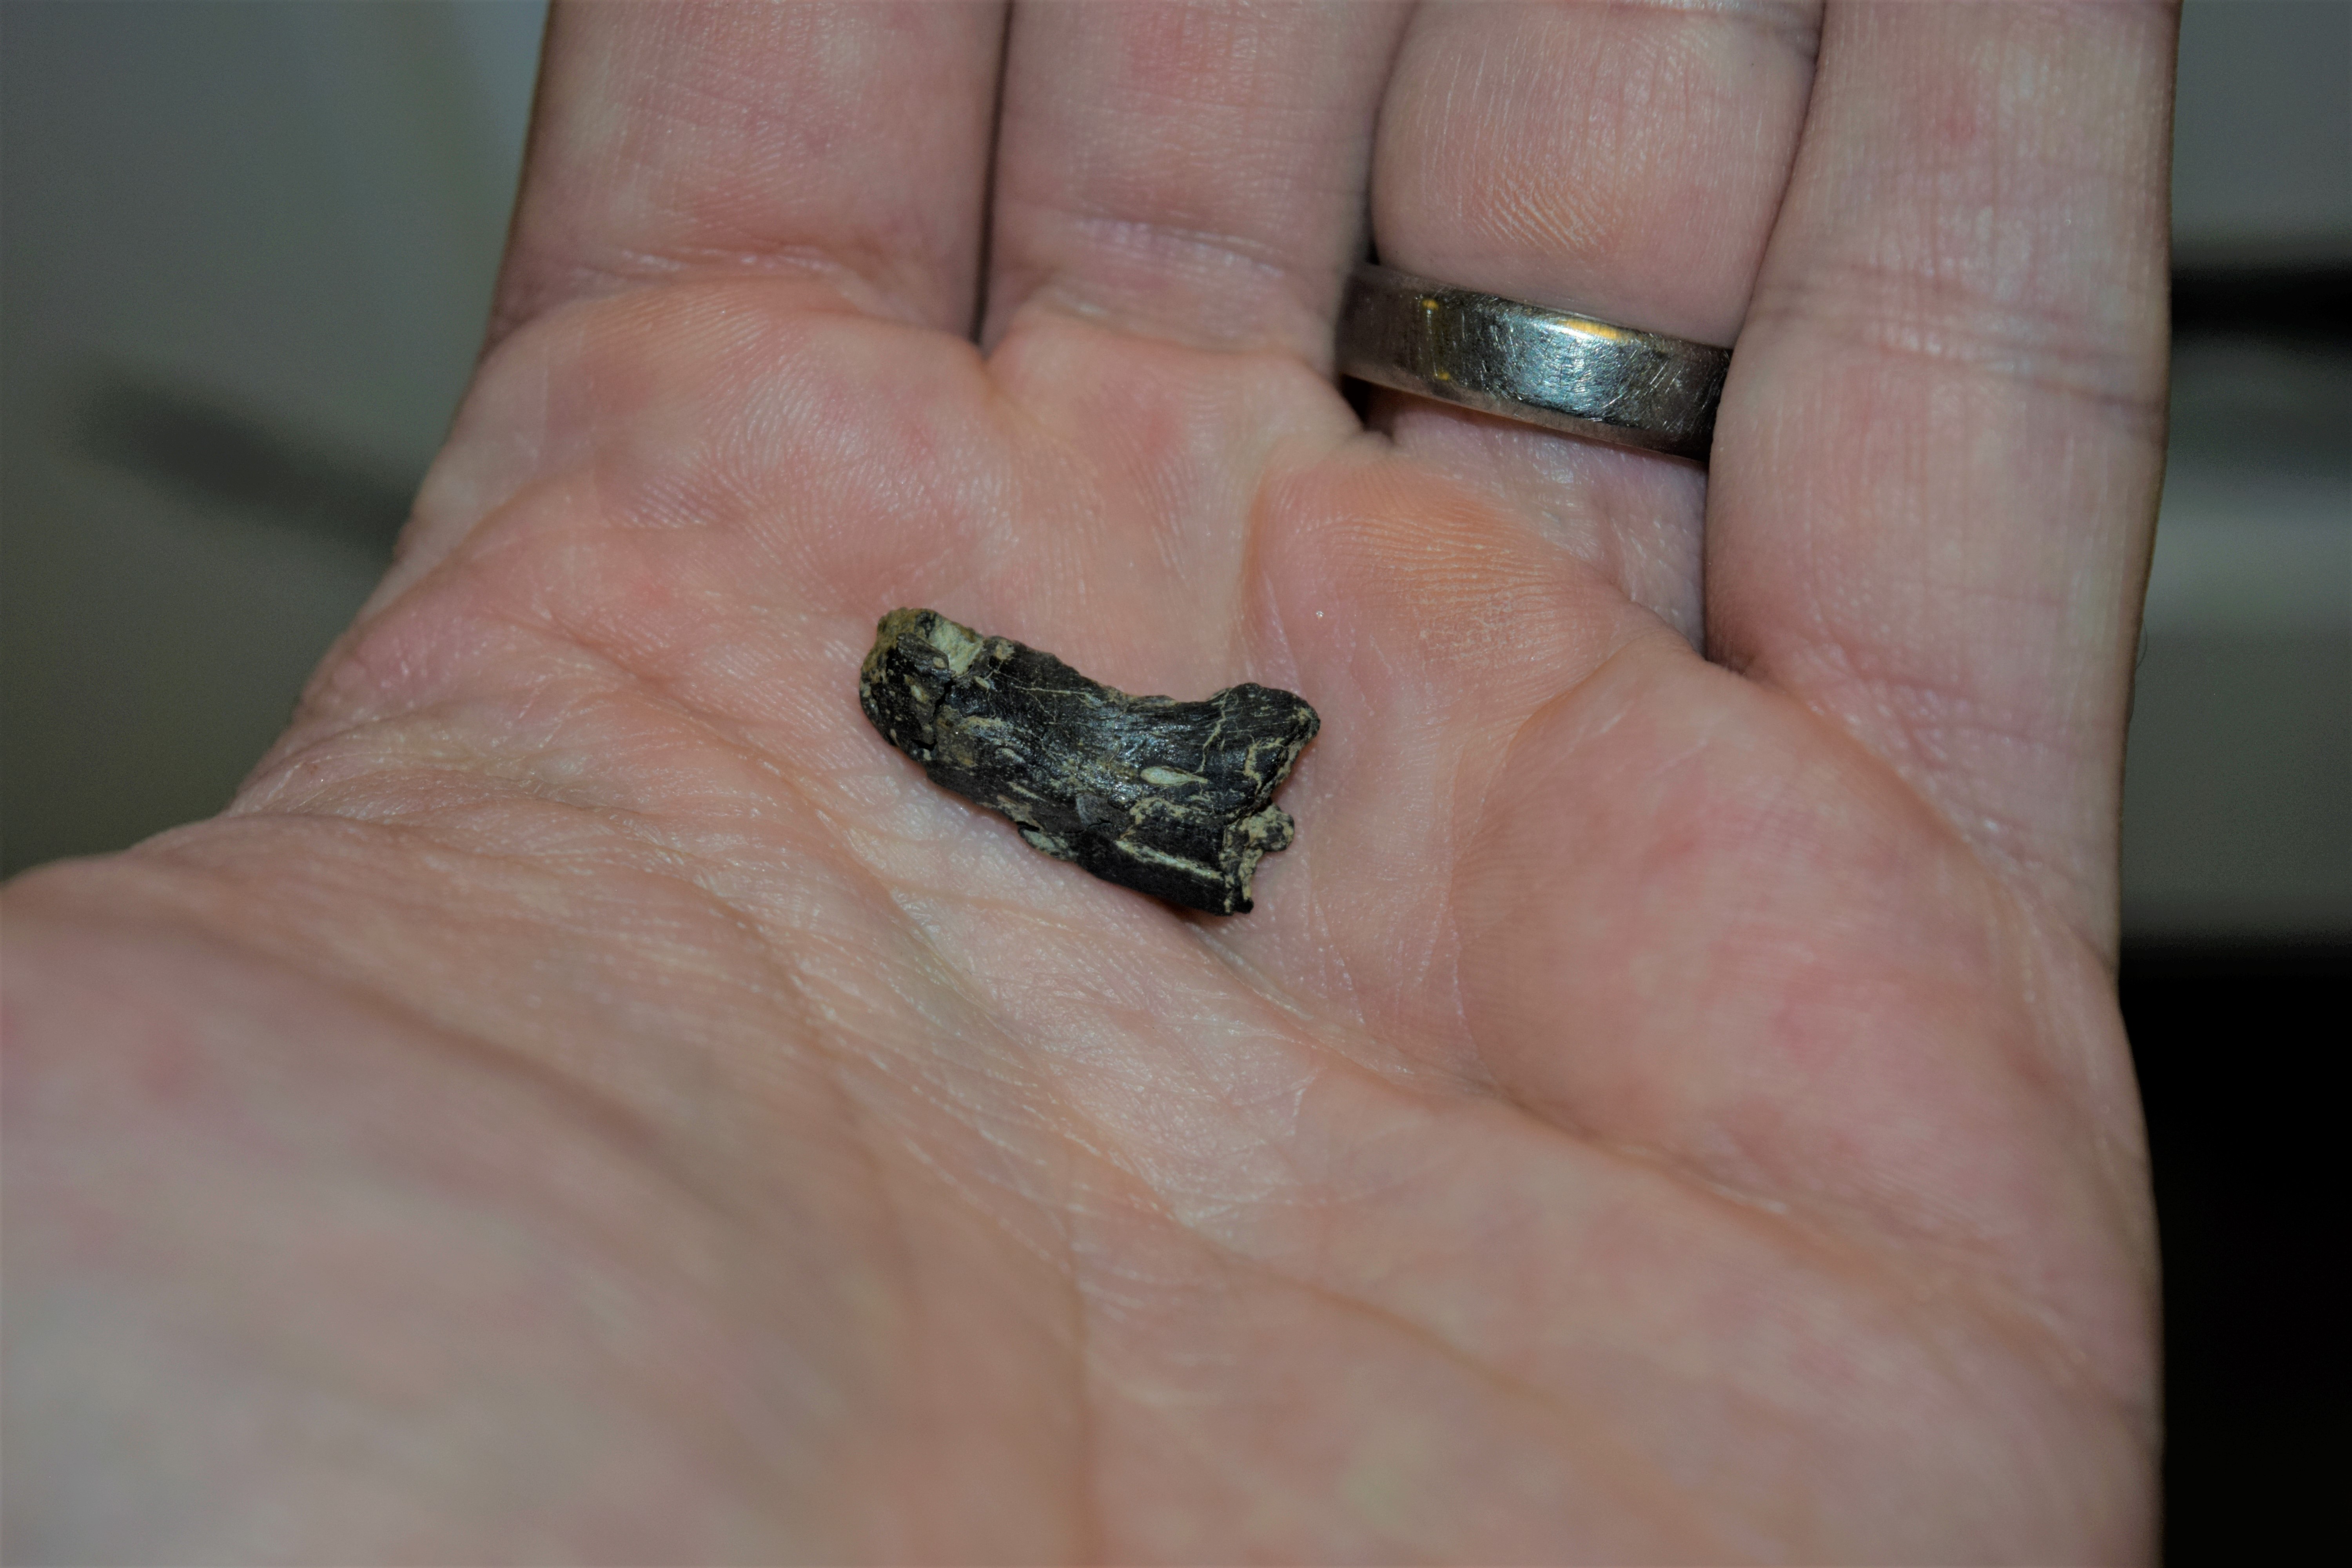 Partial cynodont therapsid dentary from Midlothian, Virginia